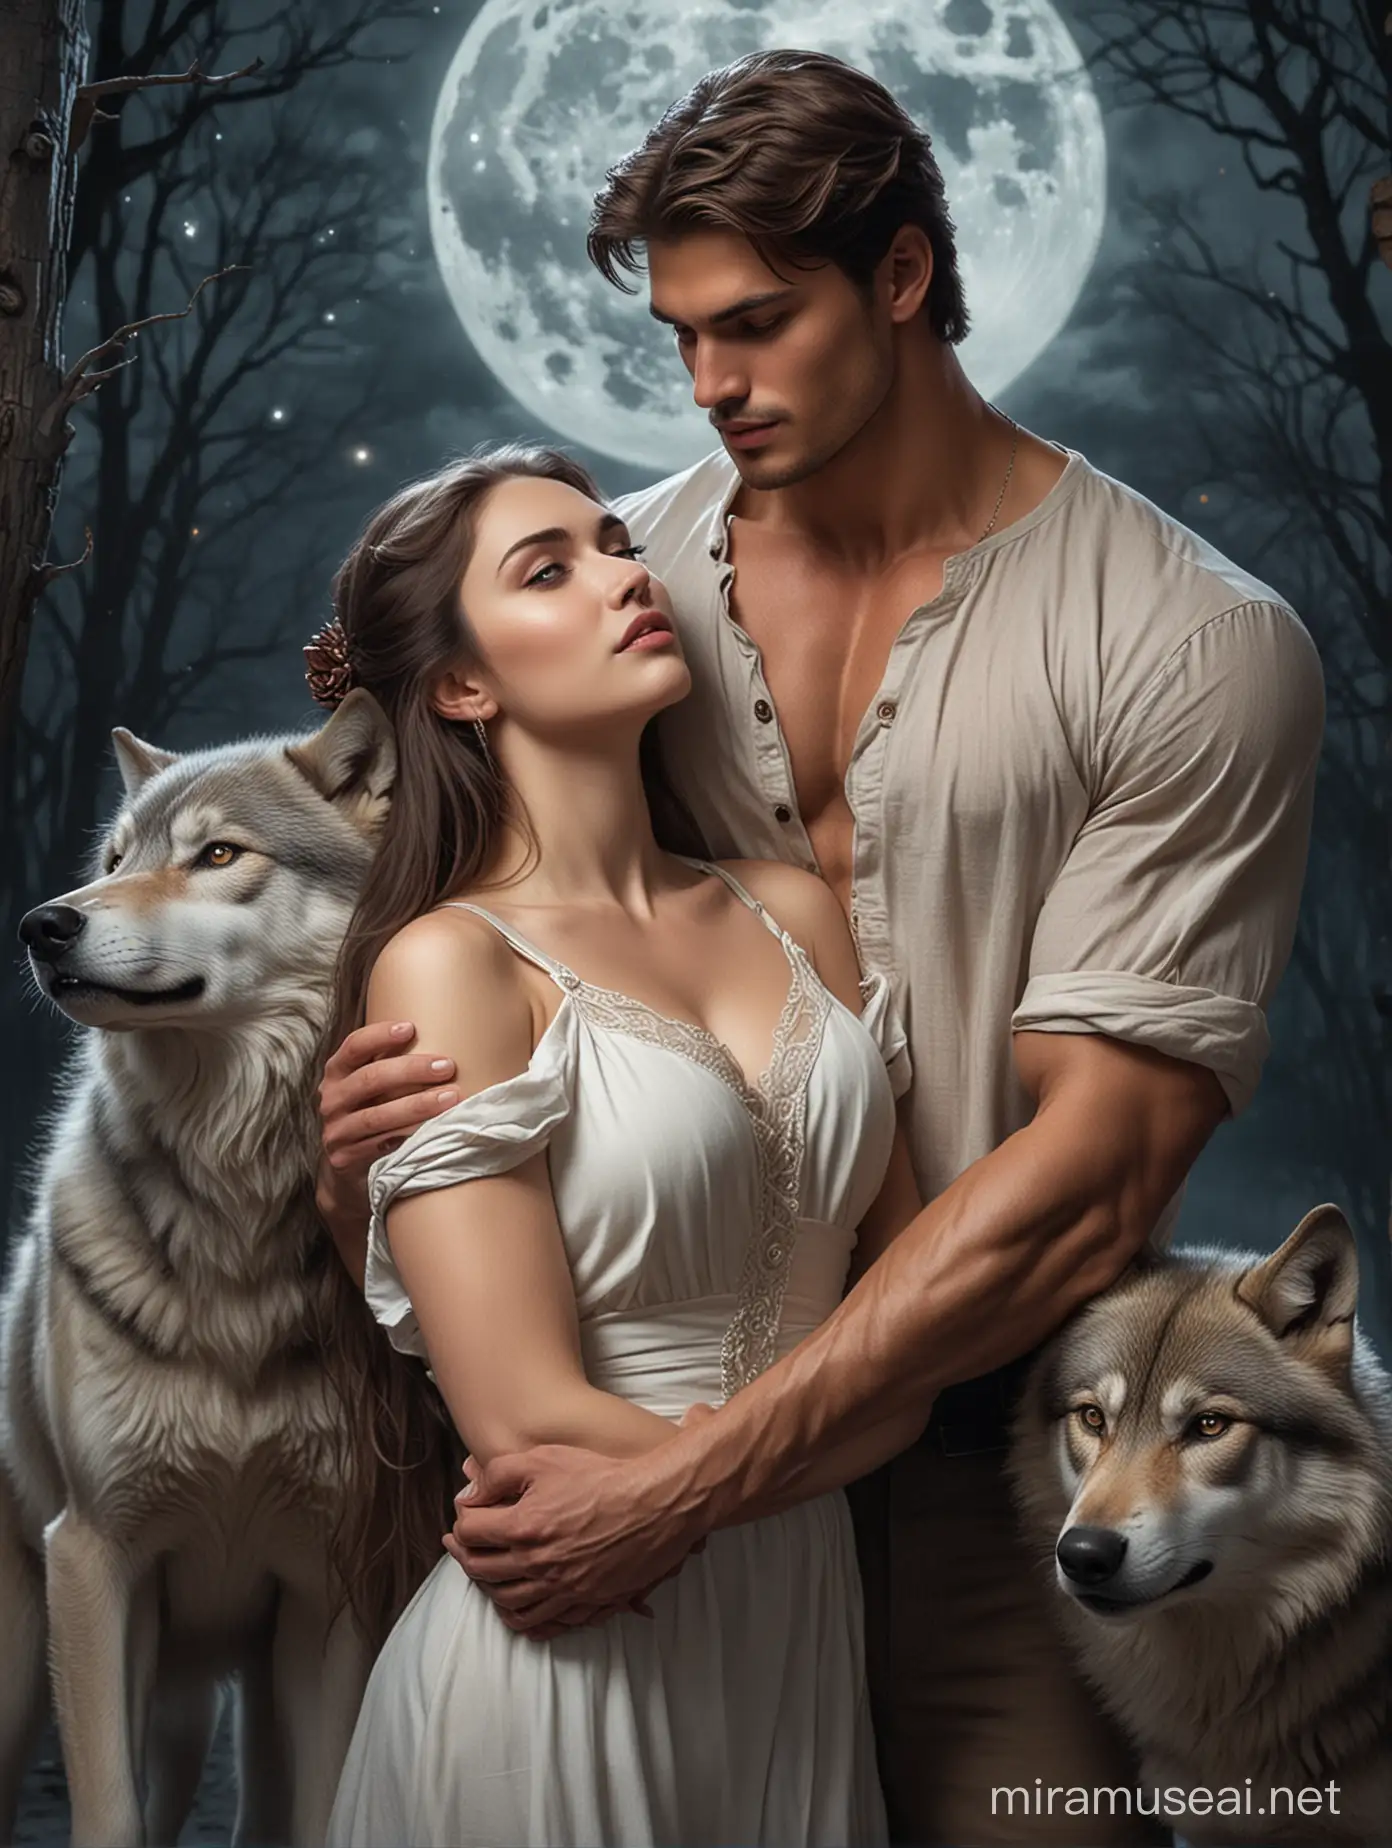 A beautiful lady leaning romantically into the arms of a handsome young muscular man, with wolves beside them, under the moon